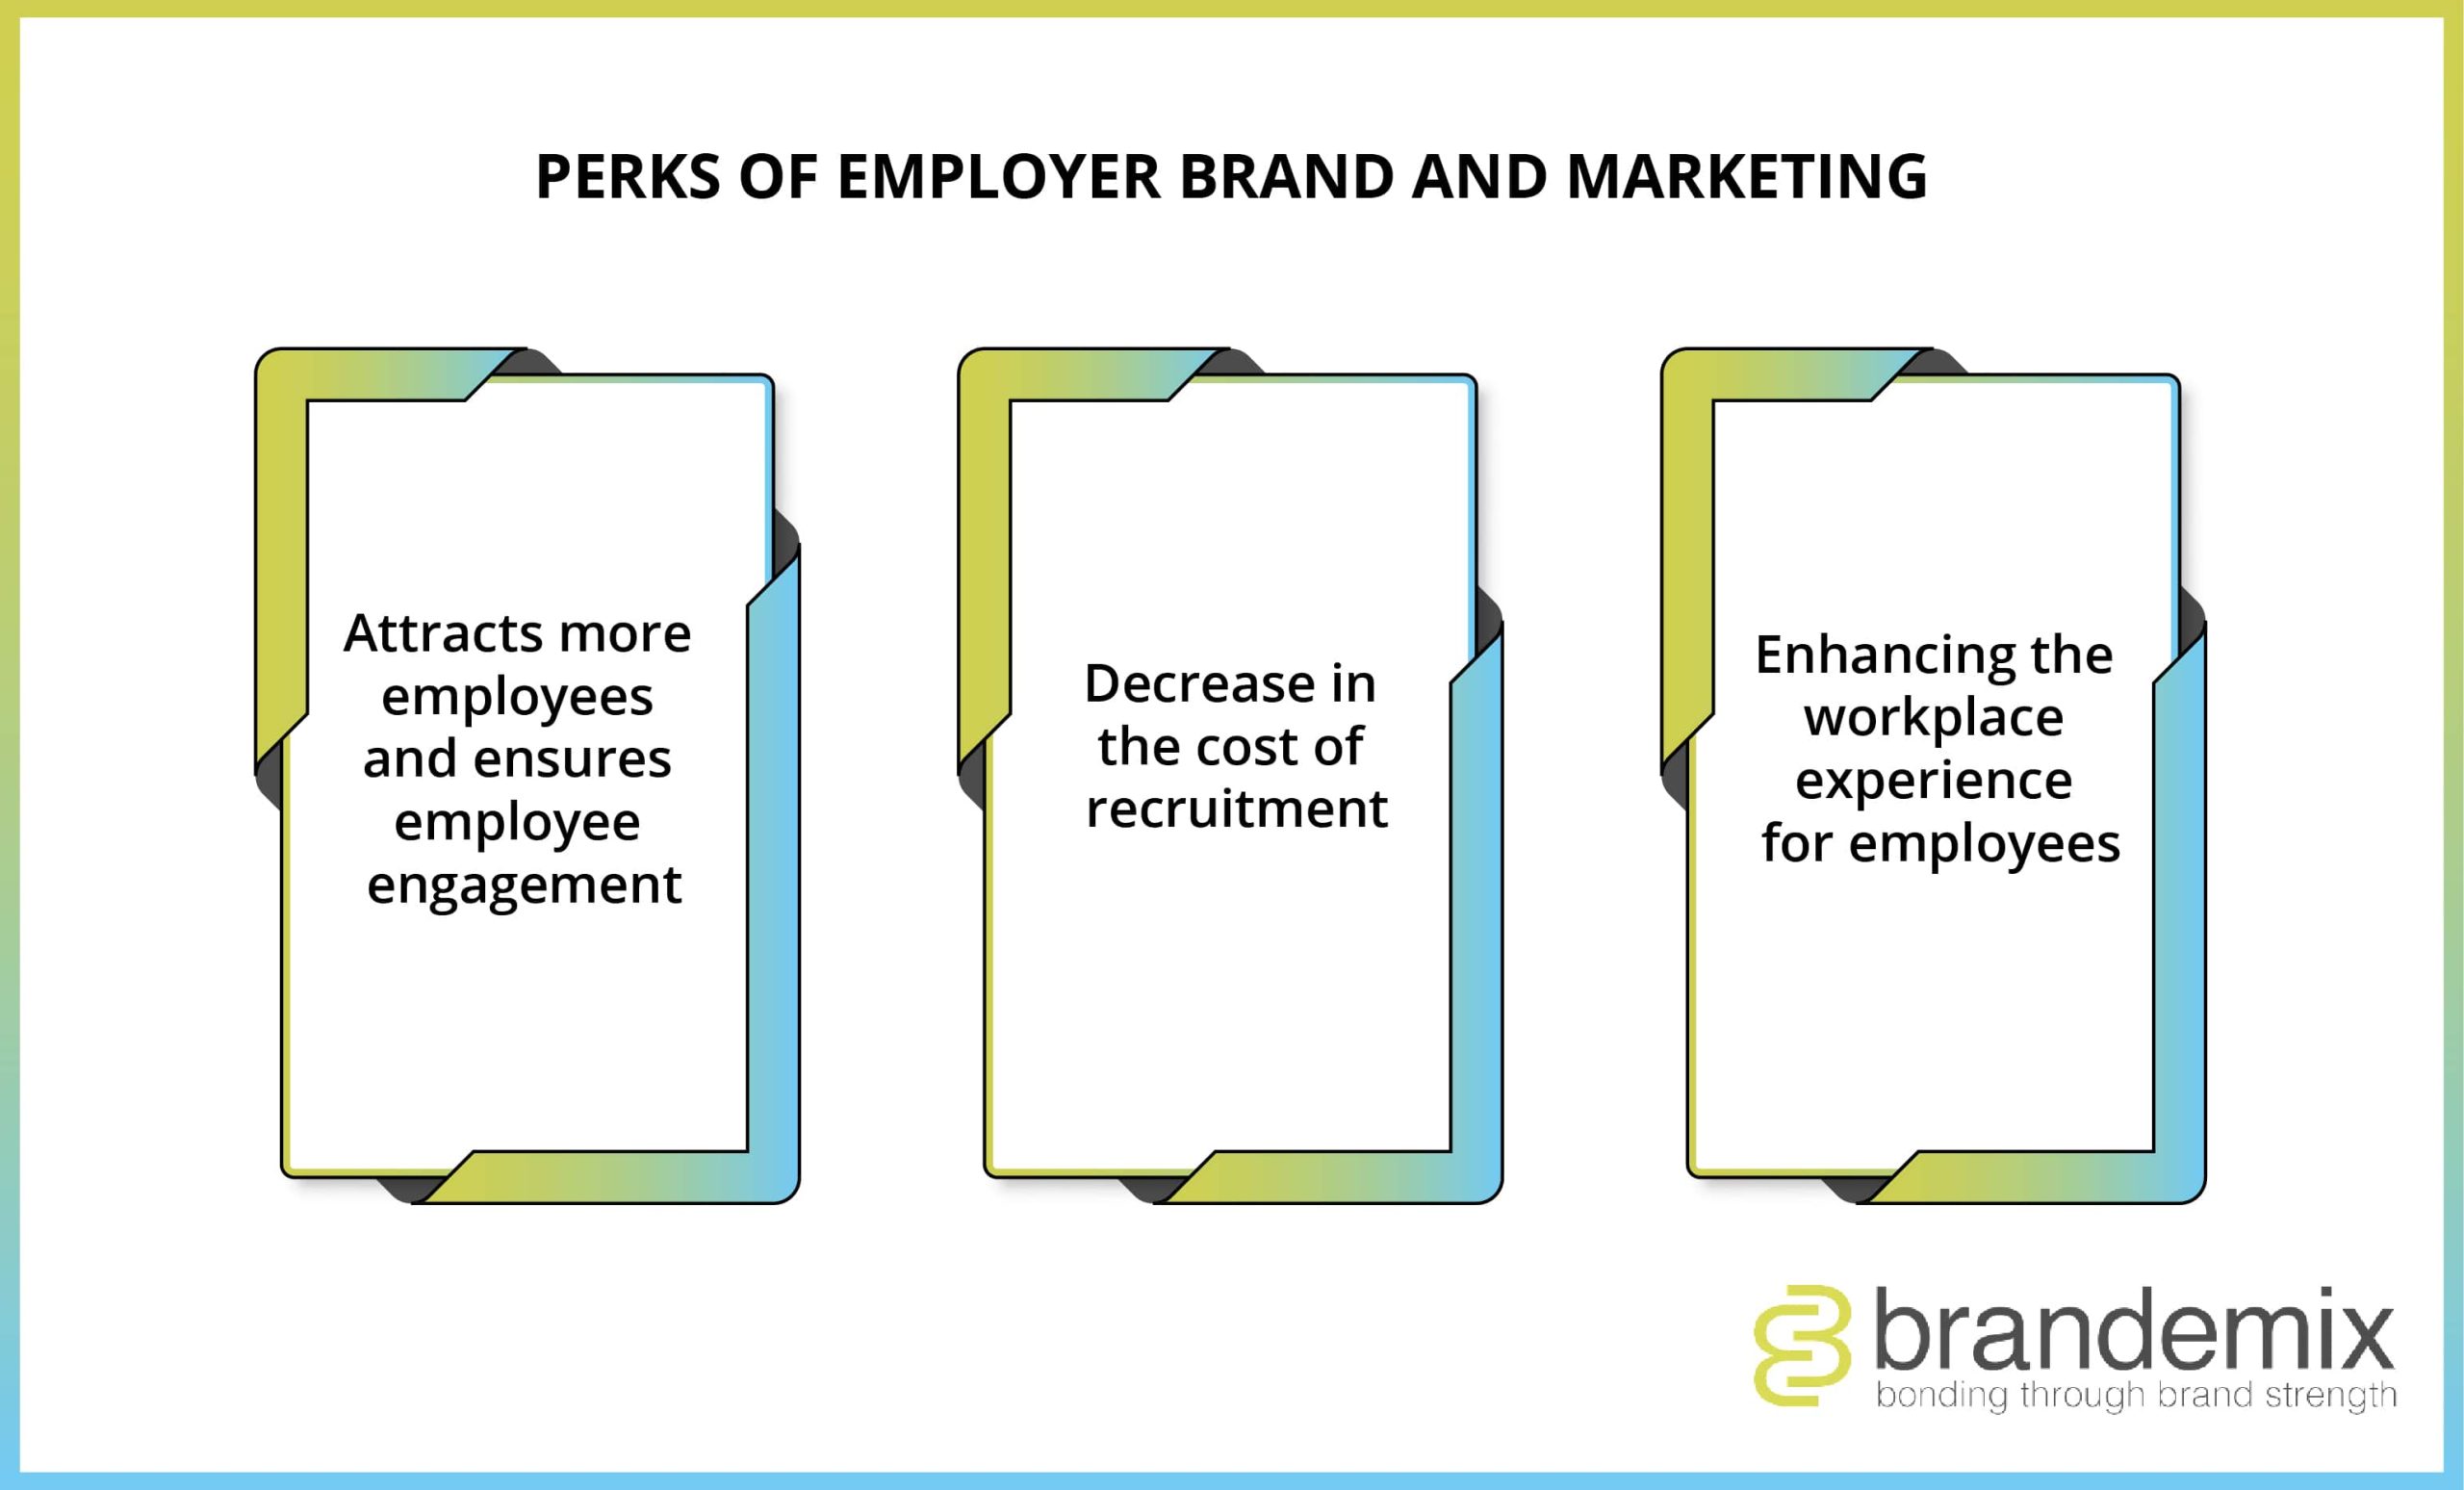 Perks of Employer Brand and Marketing